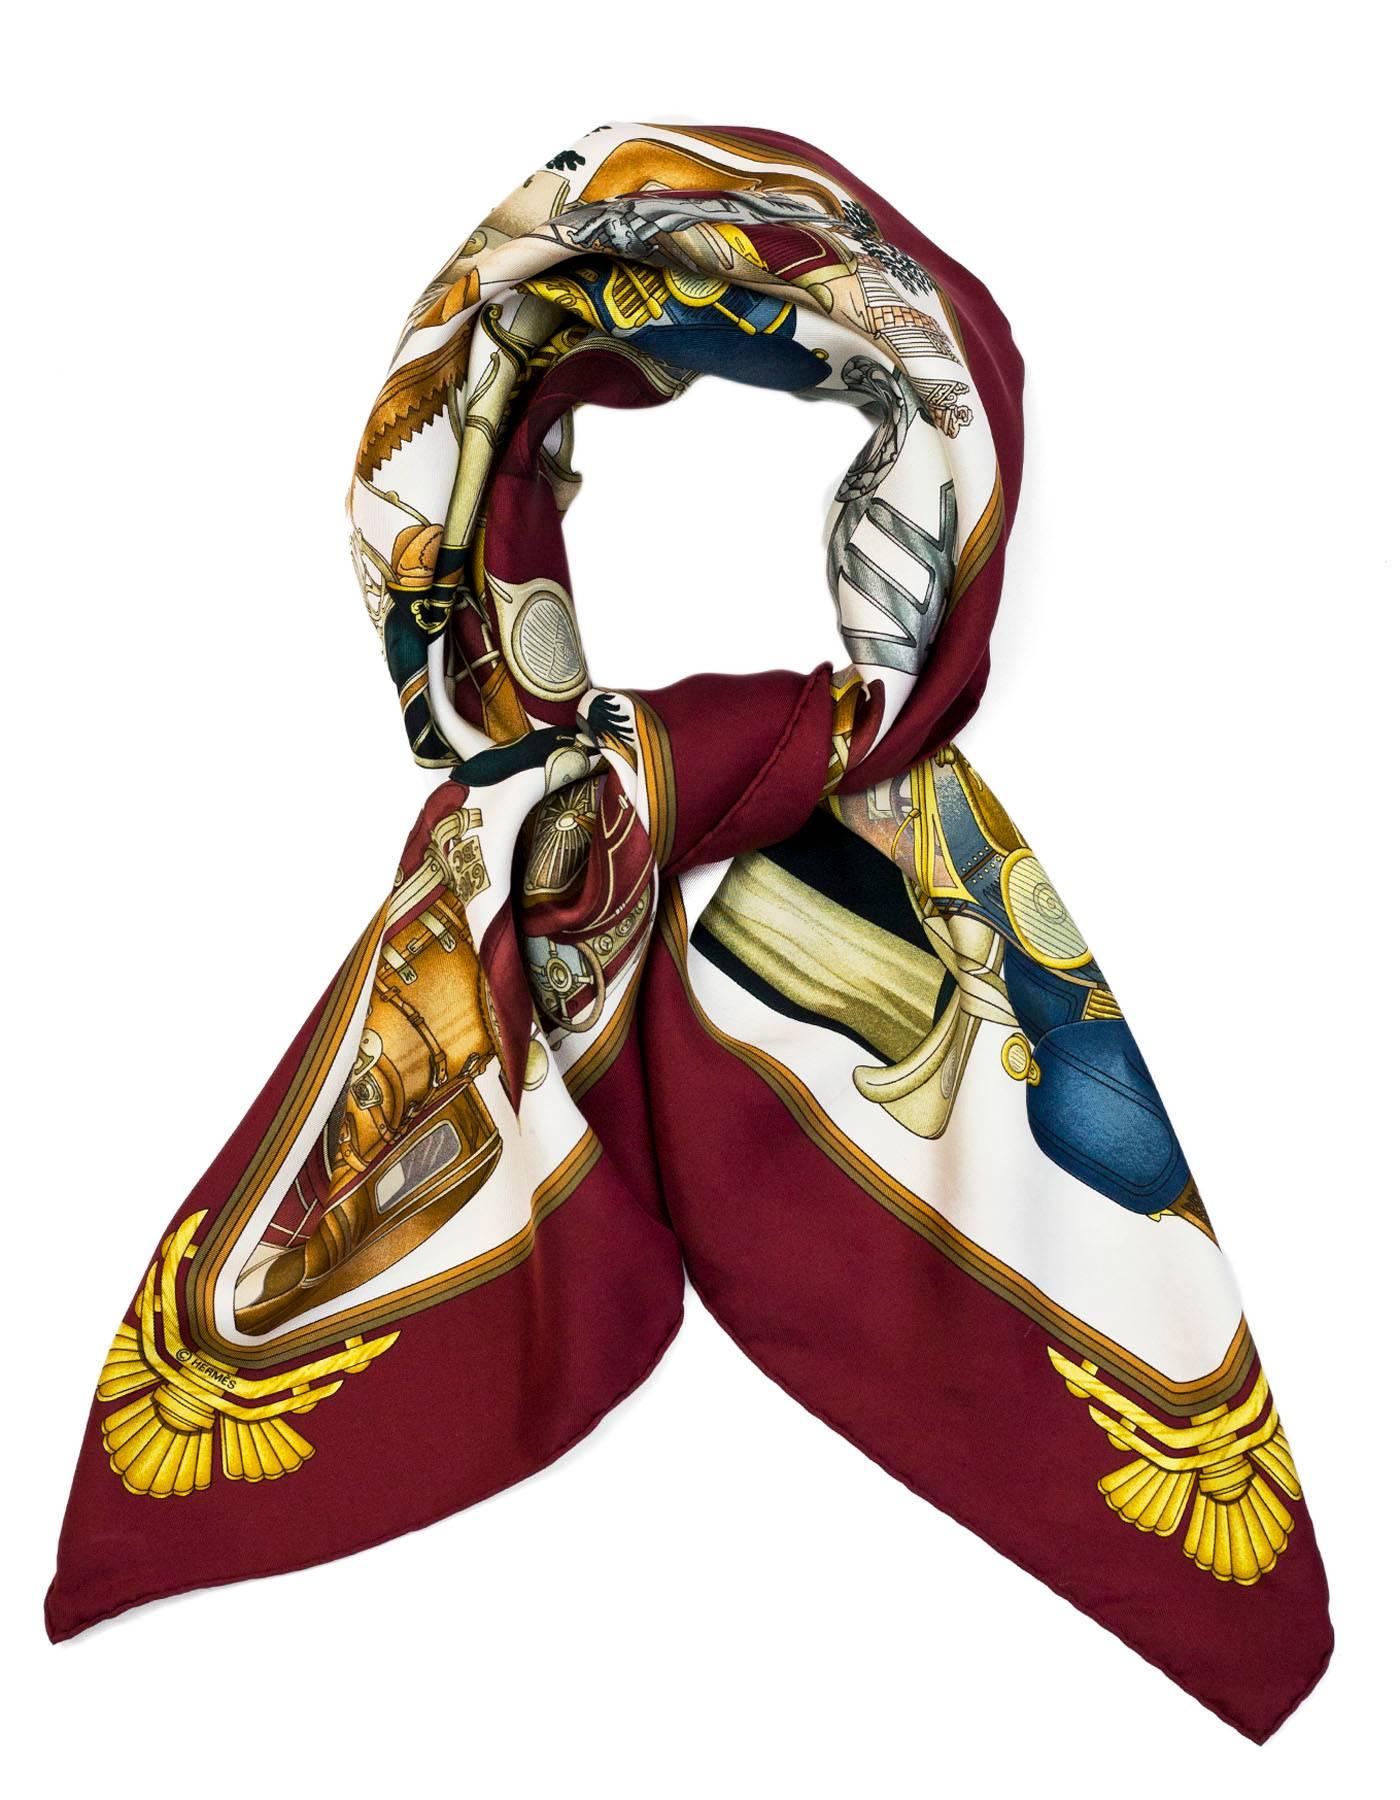 Hermes Vintage Brown Automobile Silk 90cm Scarf

Made In: France
Color: Brown, ivory
Composition: 100% Silk
Retail Price: $395 + tax
Overall Condition: Very good pre-owned vintage condition, some stains throughout

Measurements:
Length: